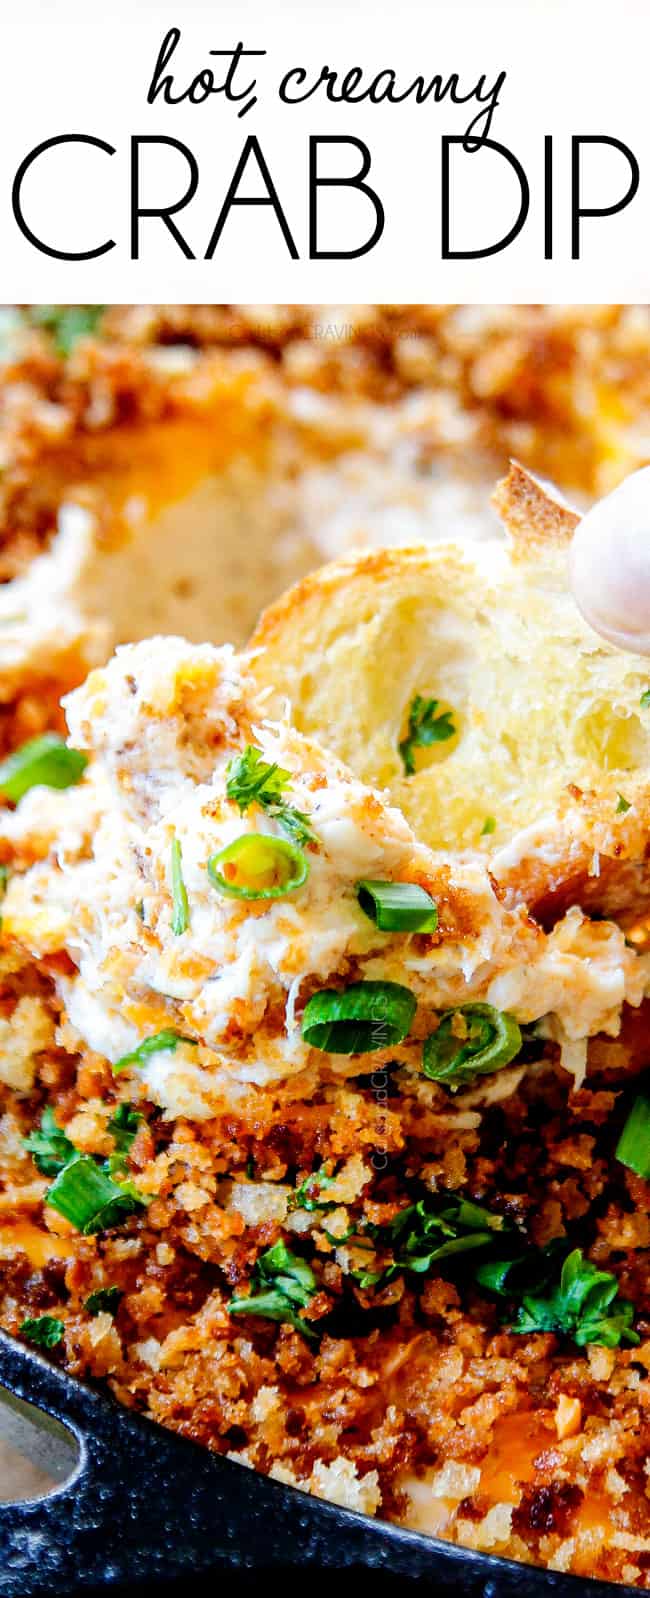 up close of serving hot crab dip recipe by scooping dip up with bread